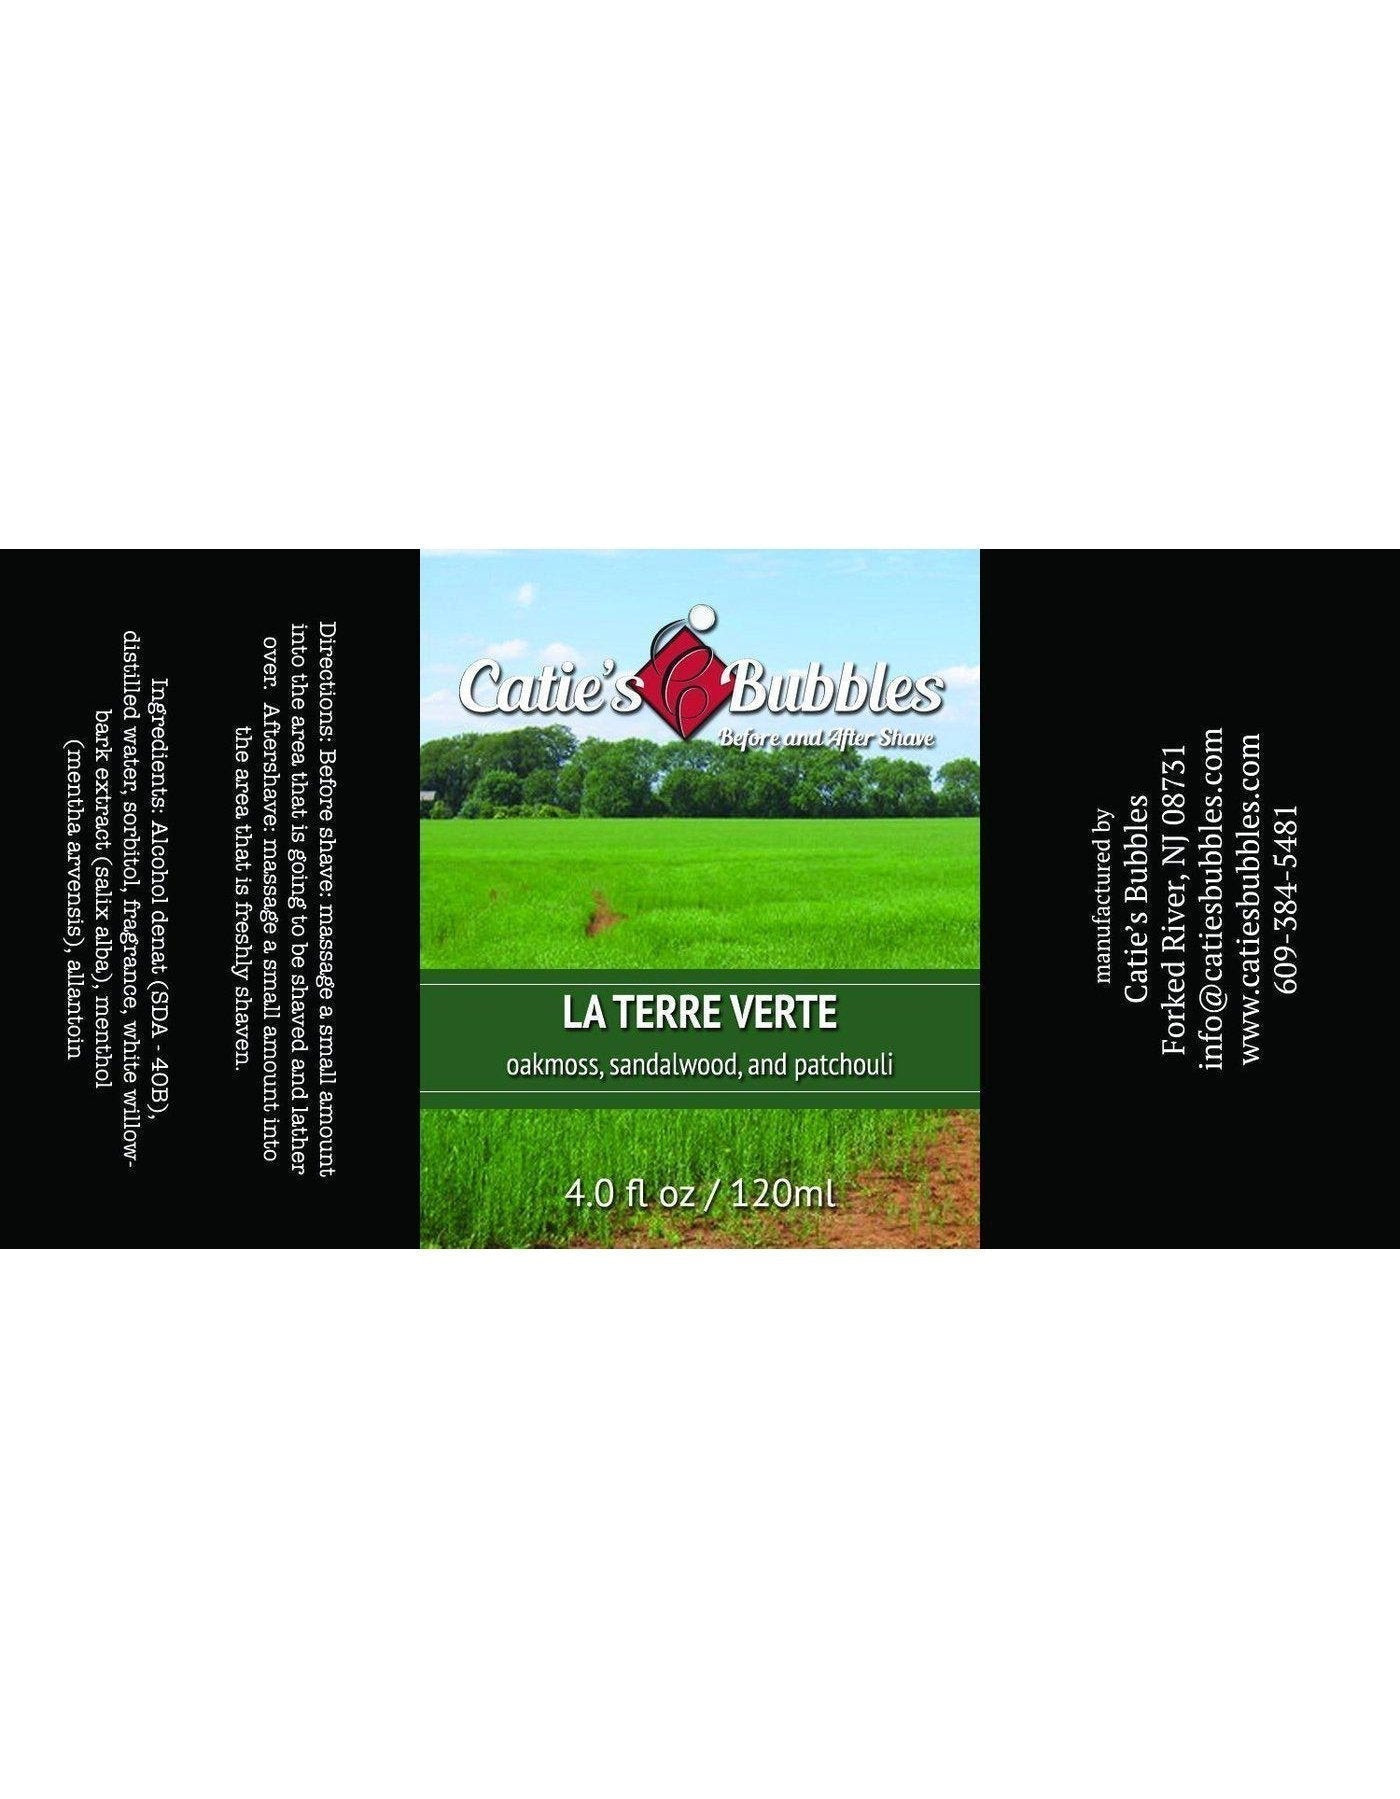 Product image 2 for Catie's Bubbles Before and After Shave, La Terre Verte